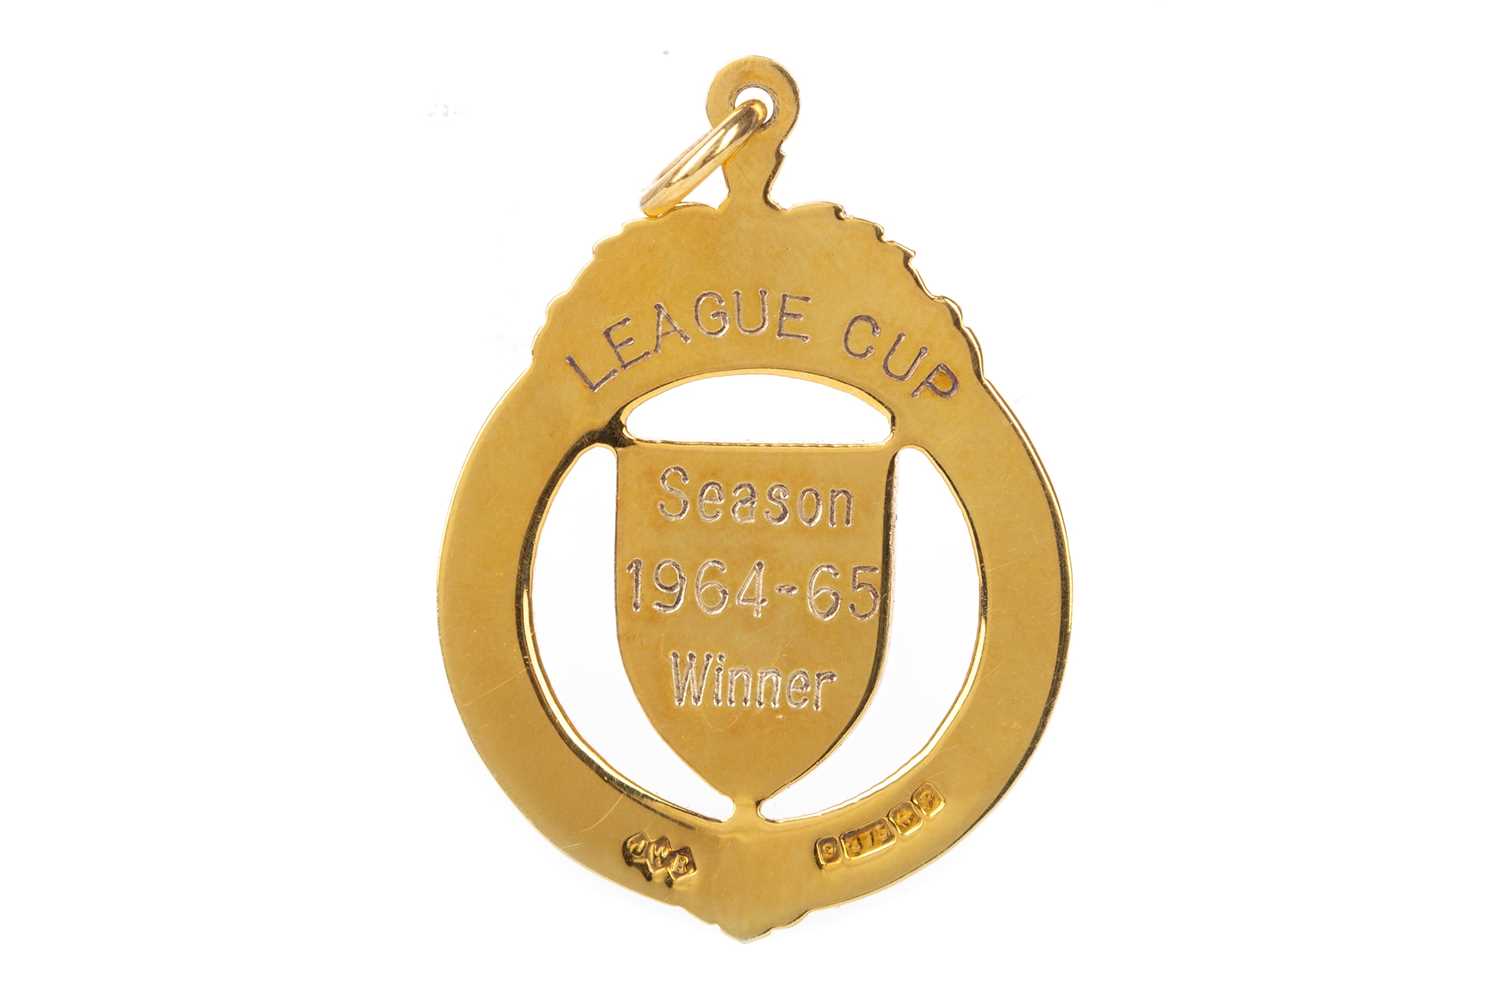 RONNIE MCKINNON OF RANGERS F.C., LEAGUE CUP WINNERS MEDAL, 1964/65 - Image 2 of 2